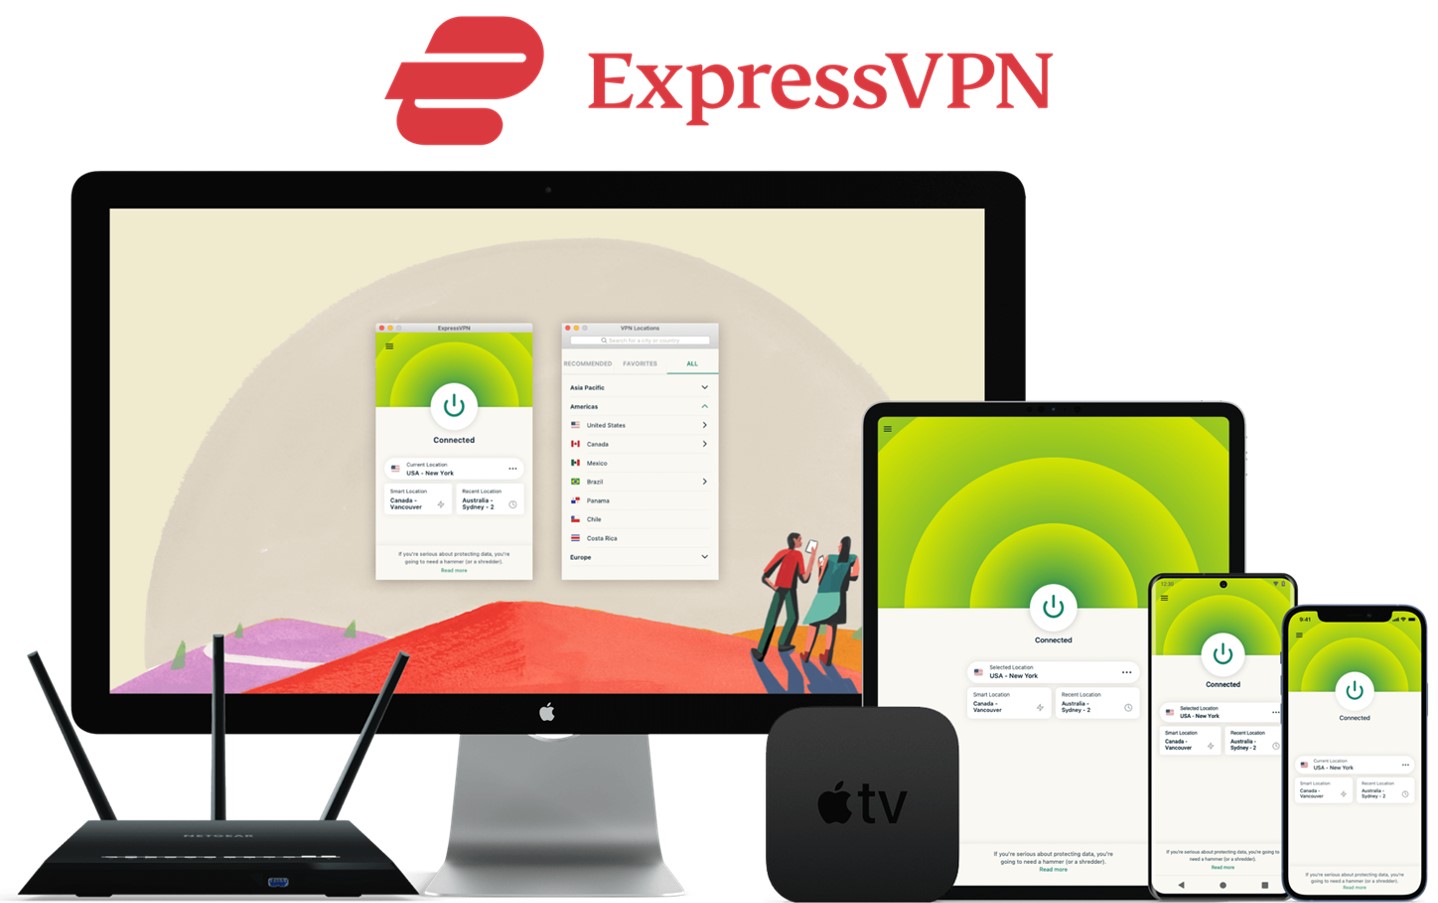 Top page of ExpressVPN